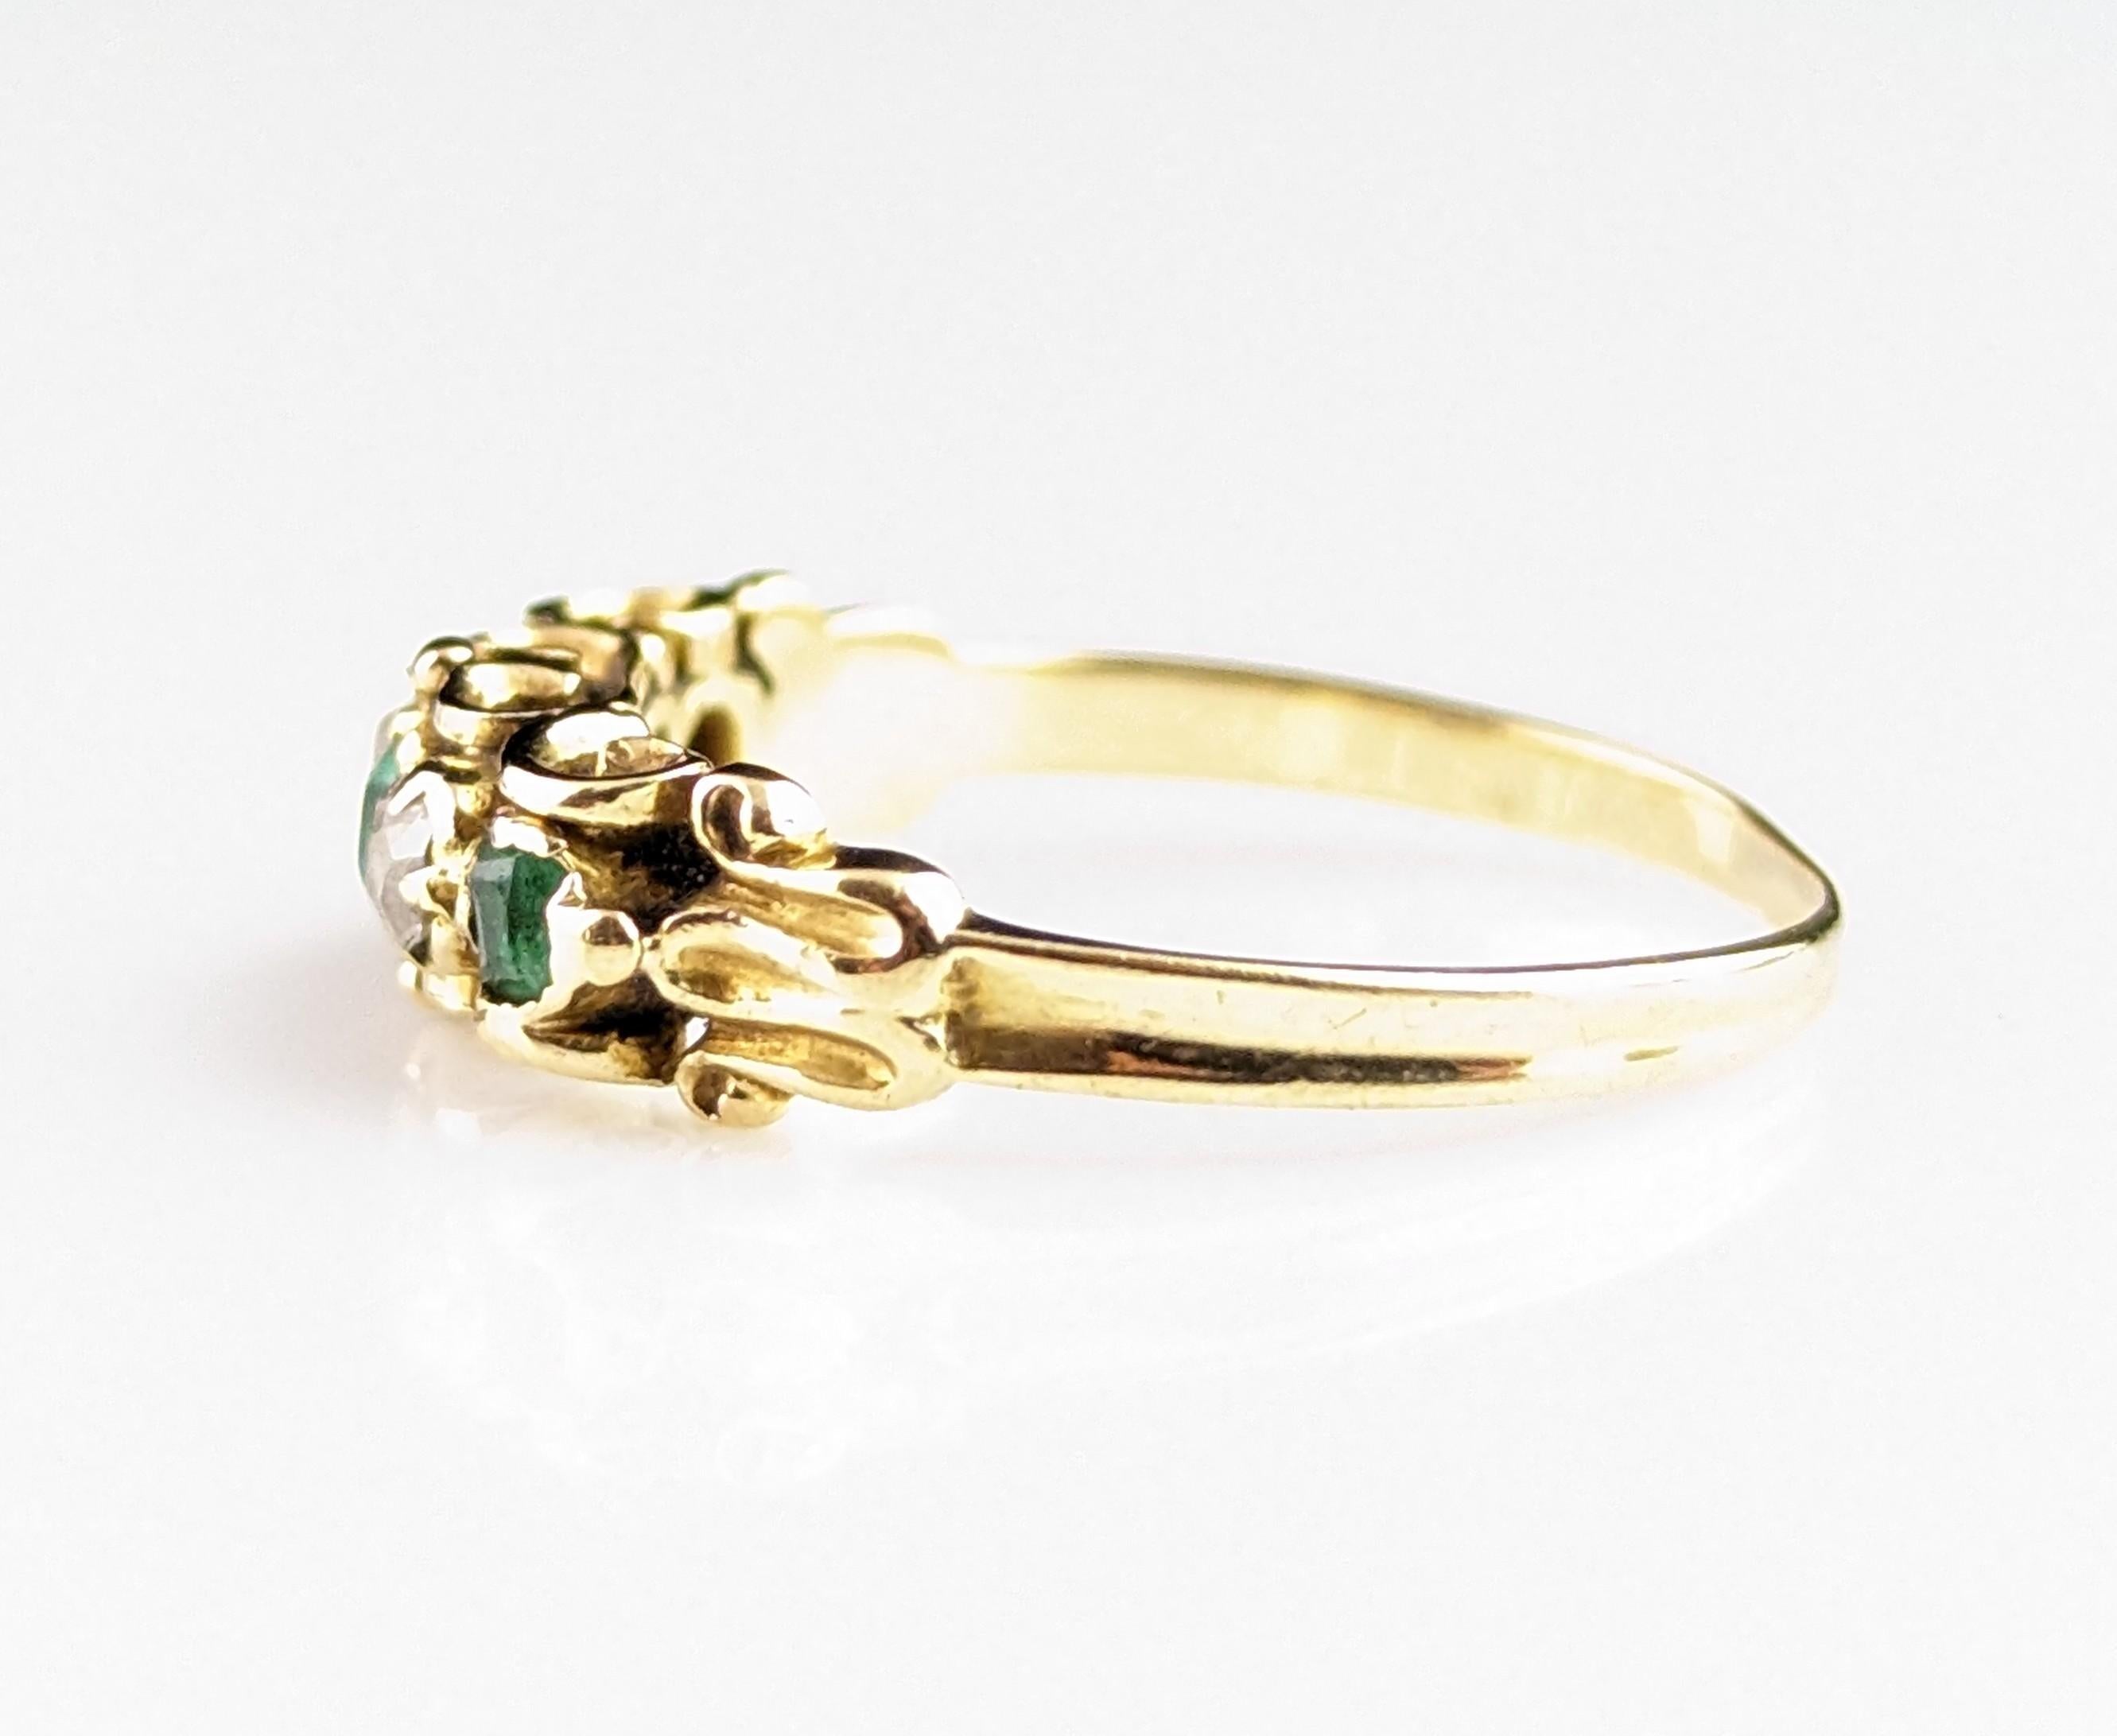 Antique Emerald and old cut diamond ring, 18k gold, Victorian five stone  5